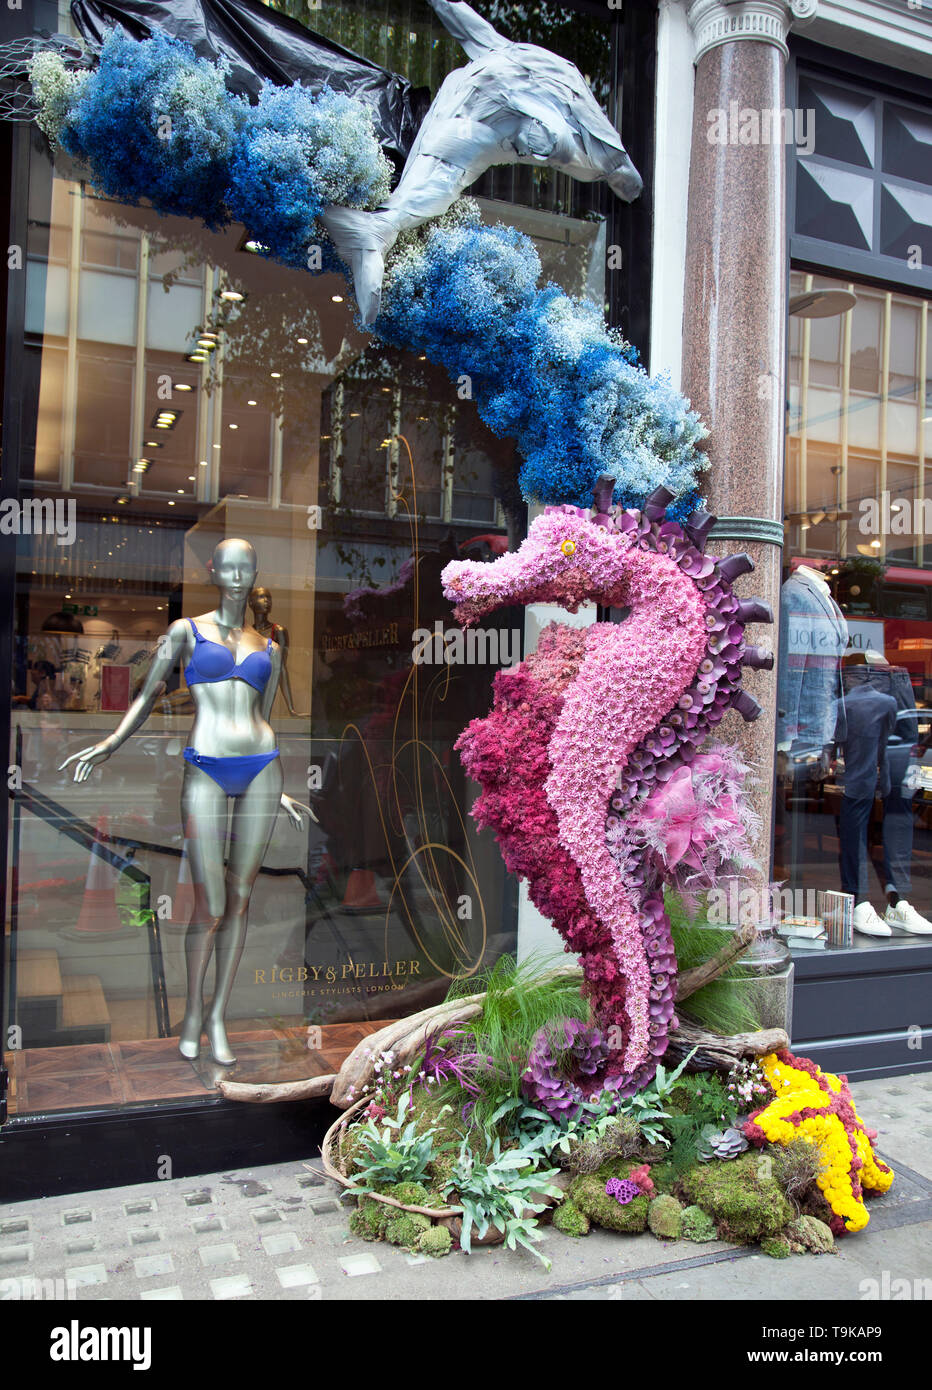 Chelsea le altre flower show - Rigby & Peller del display floreale in Kings Road, il Chelsea Foto Stock